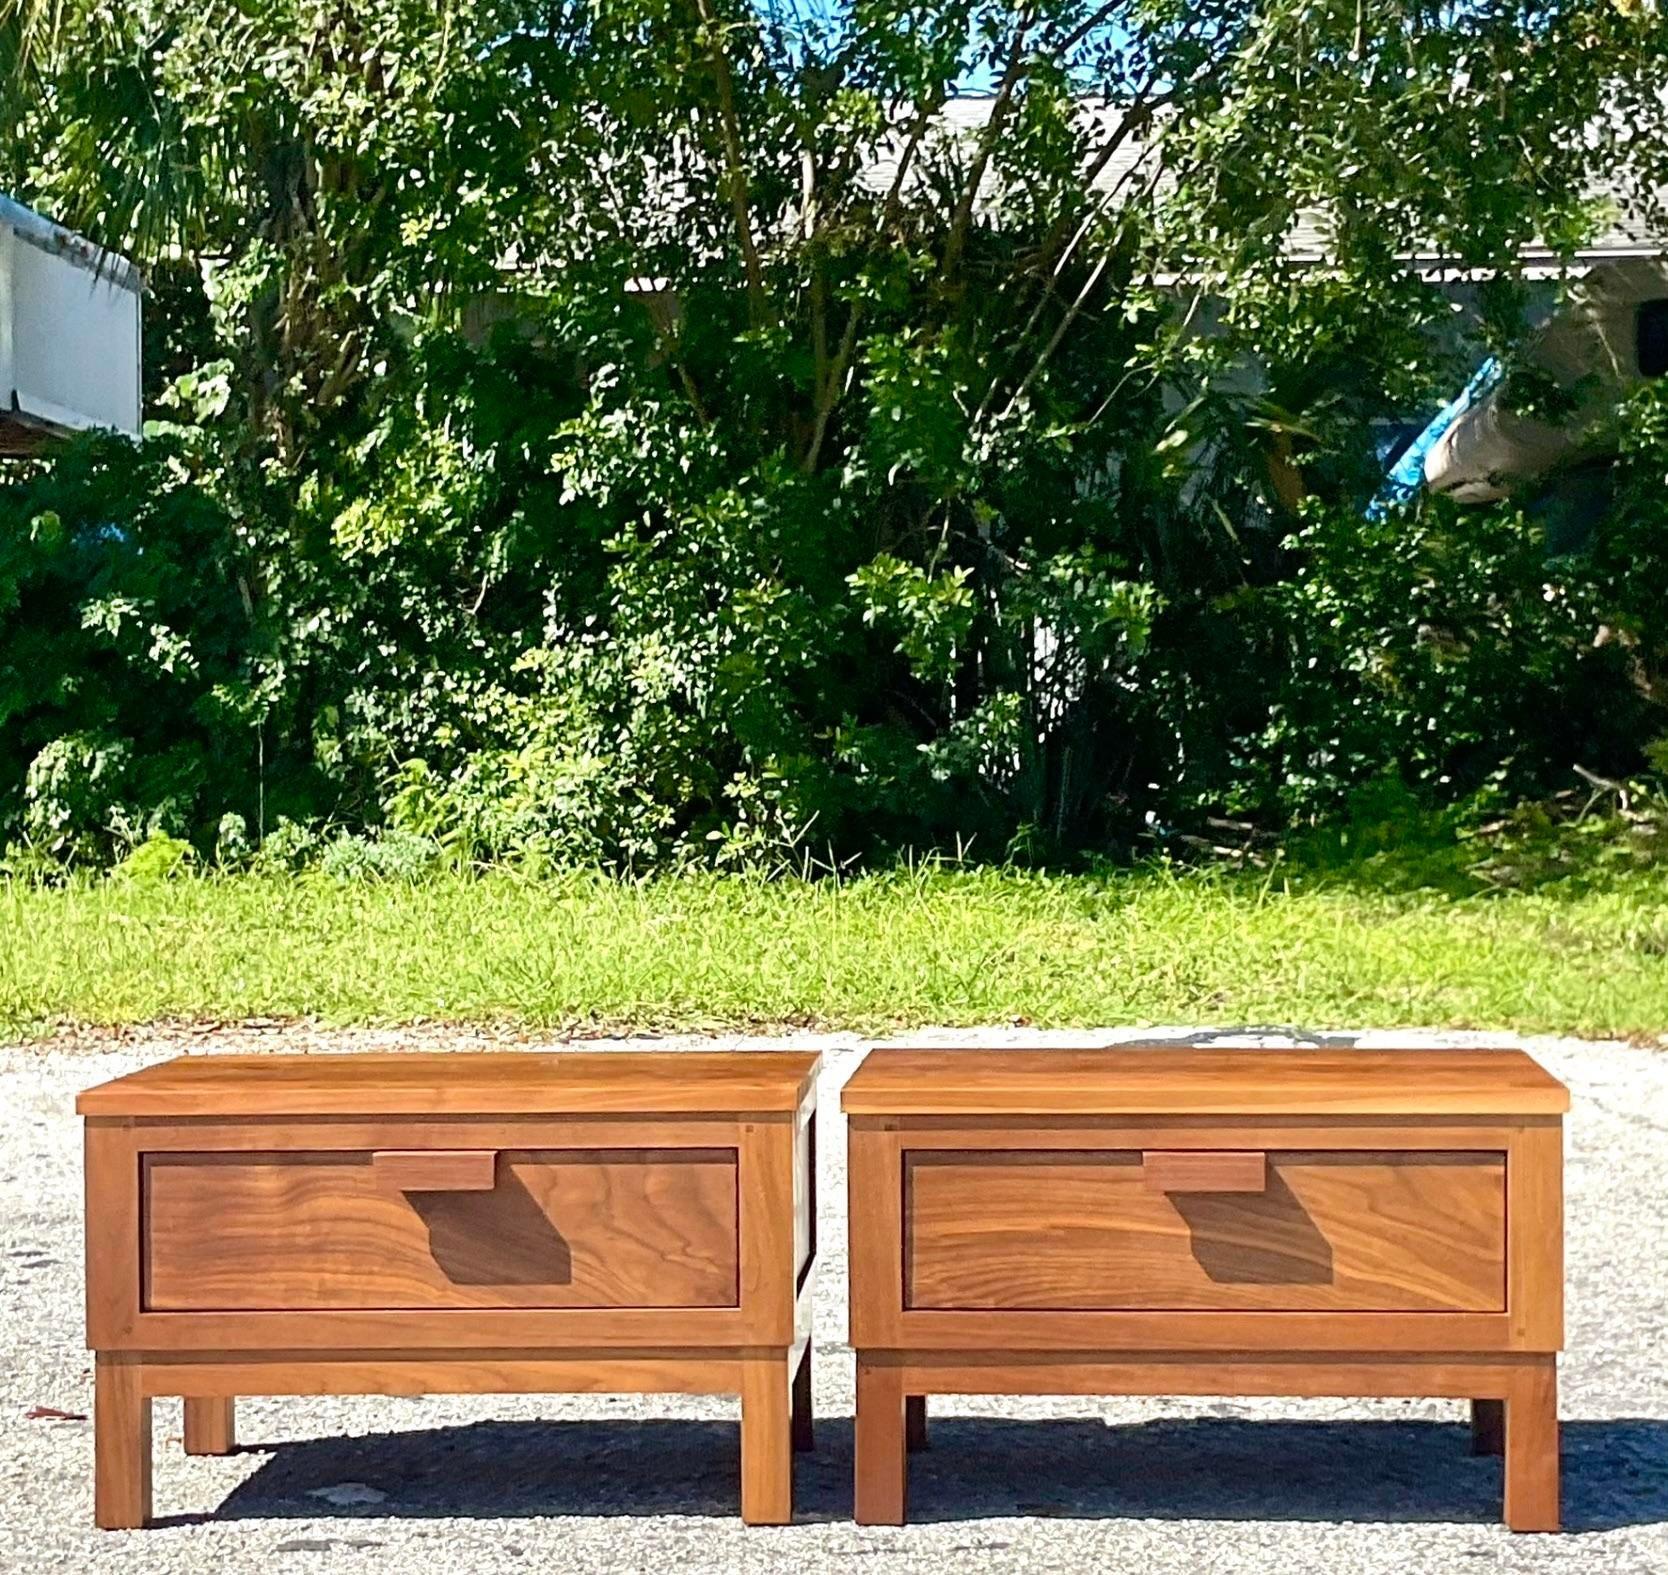 A fabulous pair of vintage Boho nightstands. A chic low profile design with beautiful wood grain detail. Acquired from a NY estate.